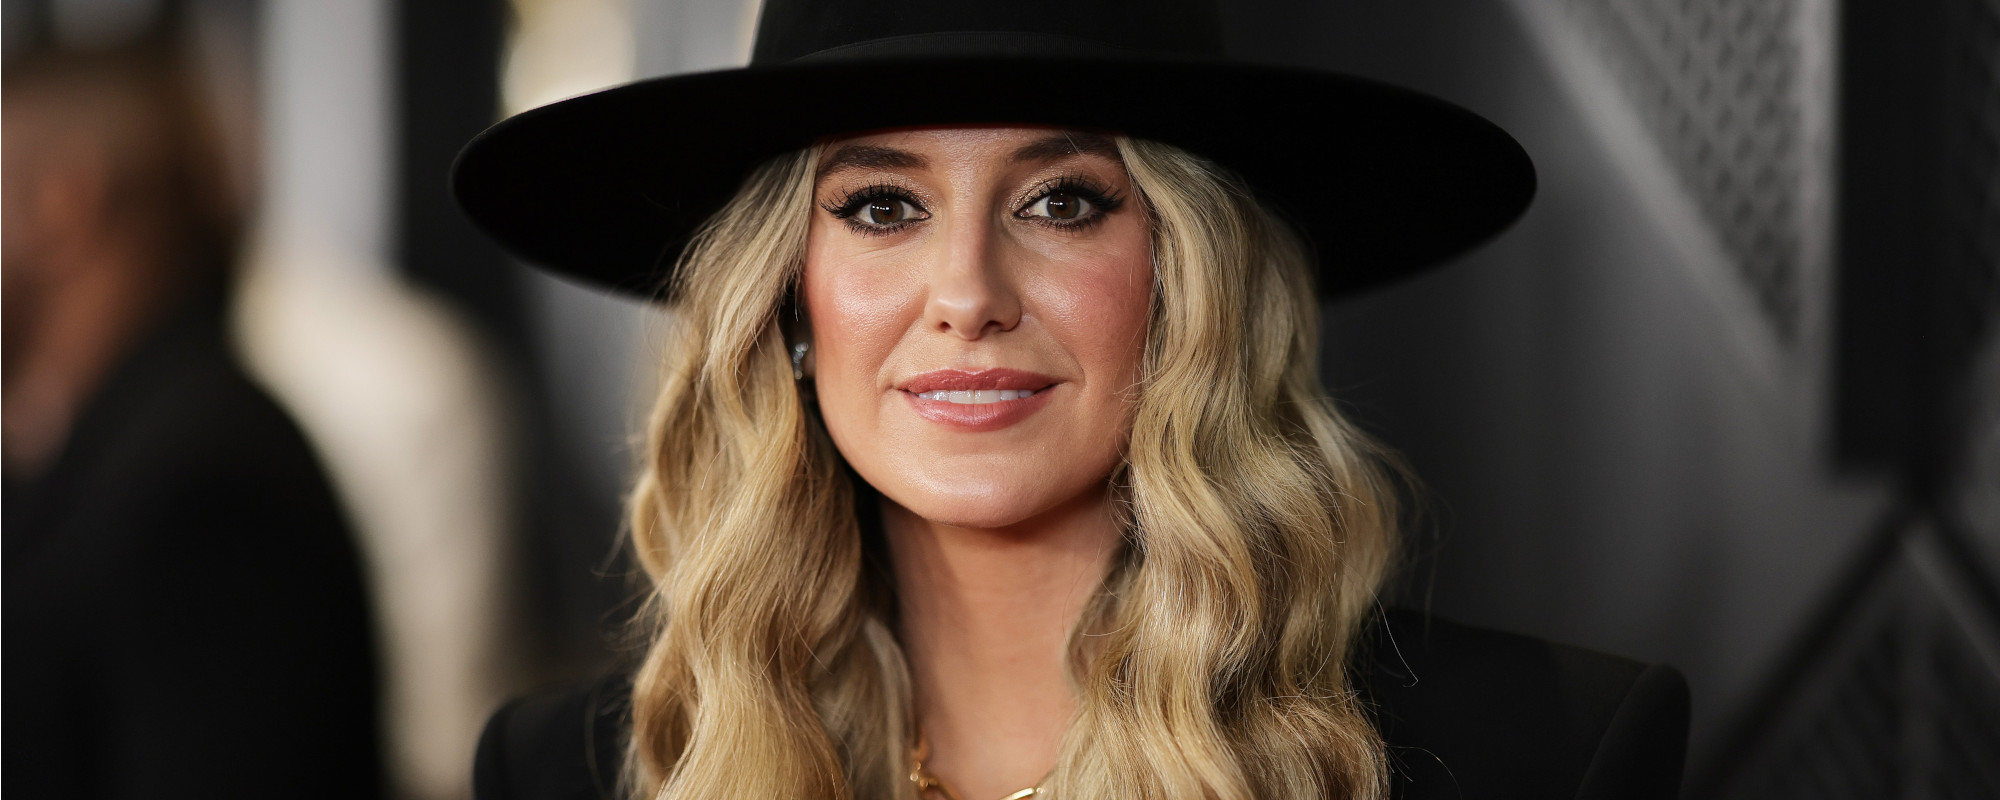 Lainey Wilson Defends Beyoncé’s Venture into Country Music: “Come on Home, Girl!”